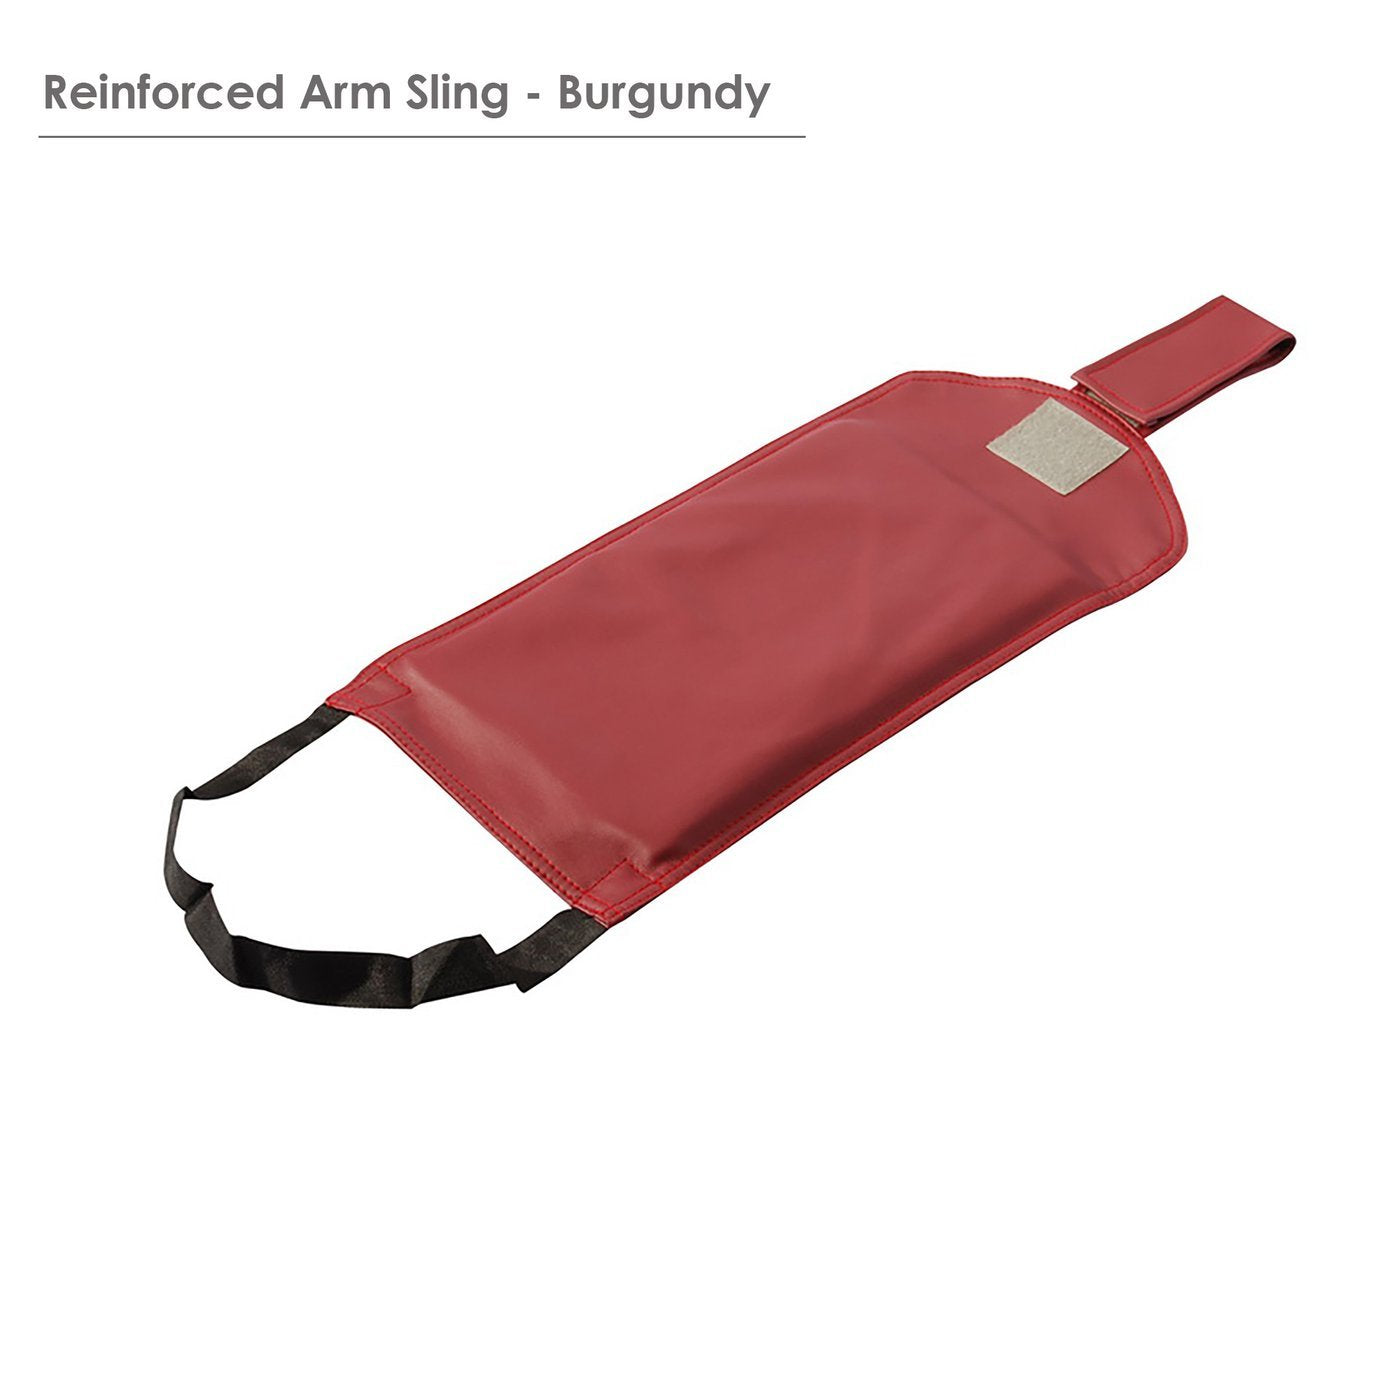 Arm Sling for Massage Table